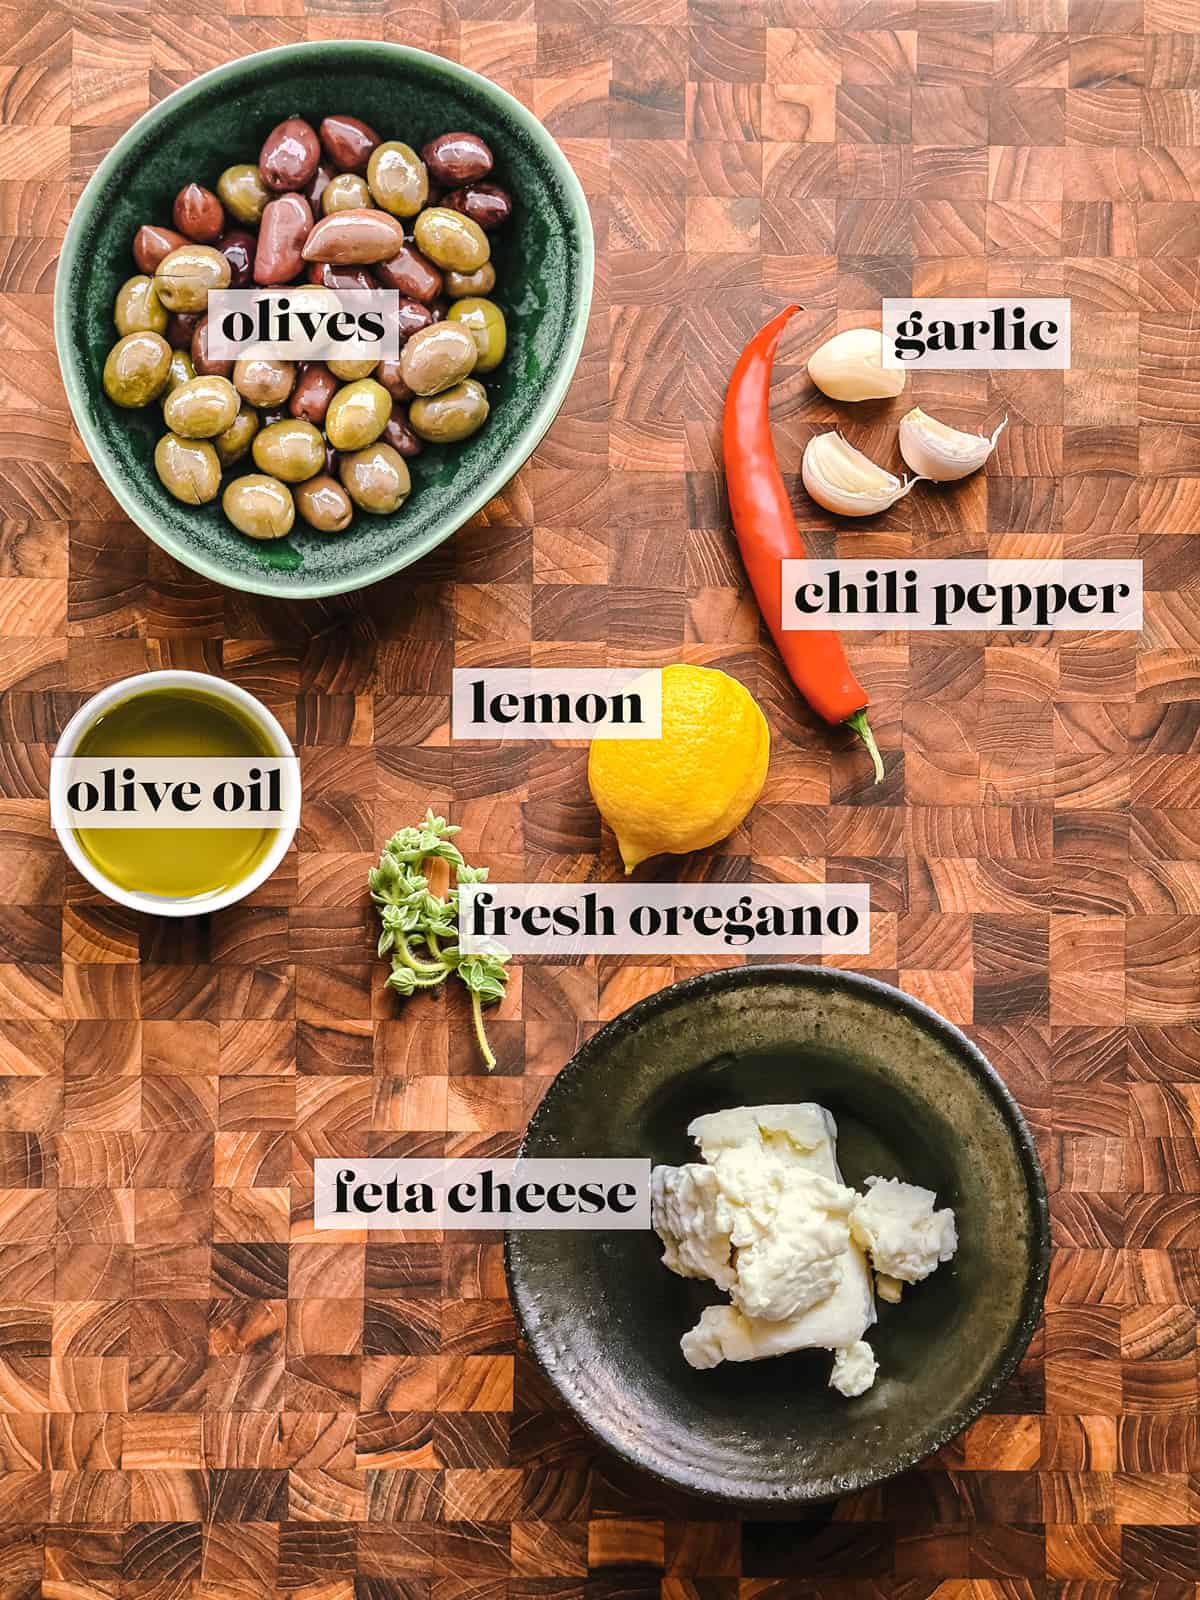 Ingredients to make marinated olives.